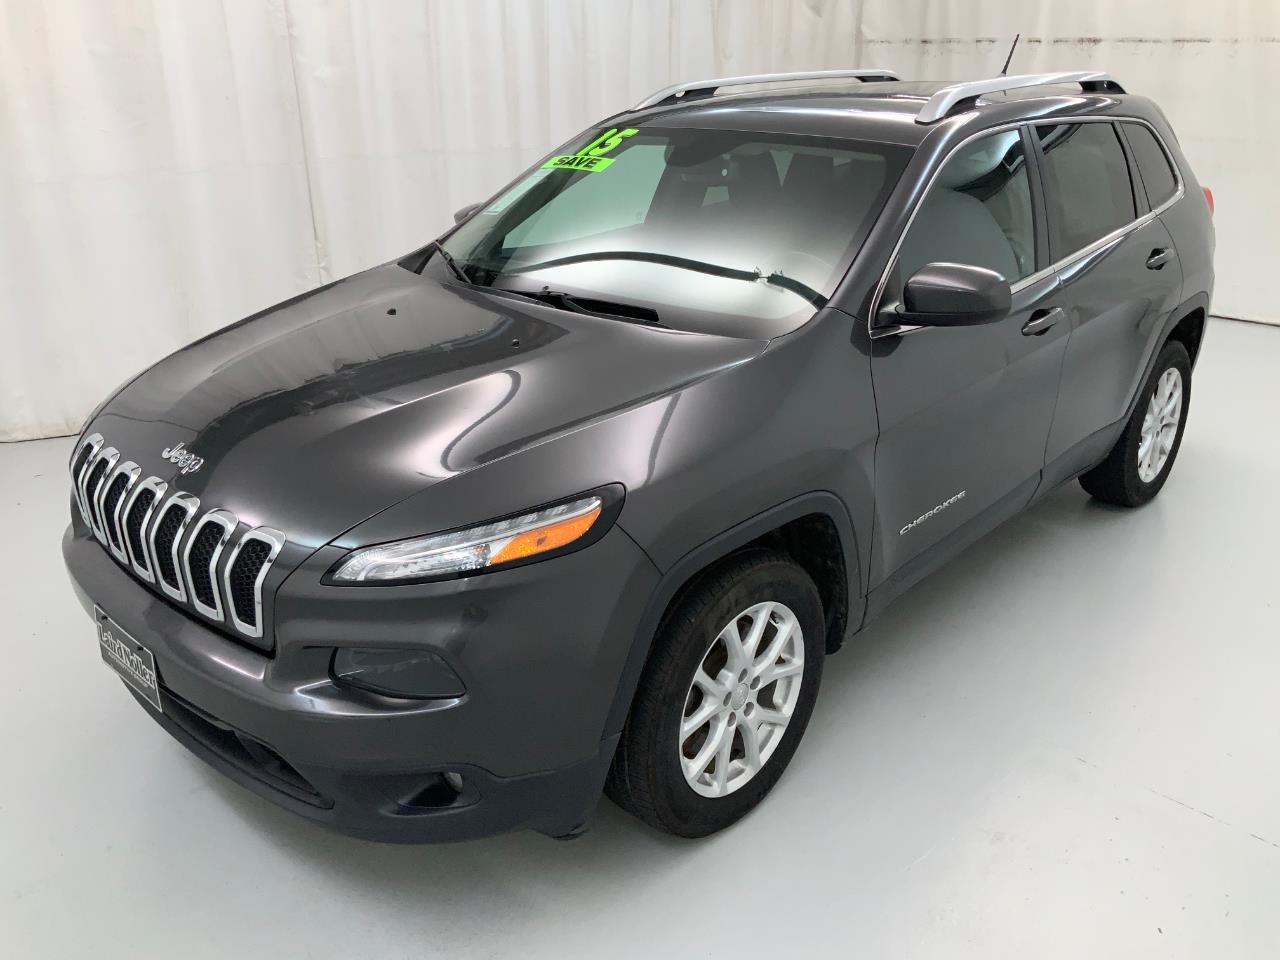 Pre Owned 2015 Jeep Cherokee Latitude FWD SUV in Topeka PT6437 Laird 